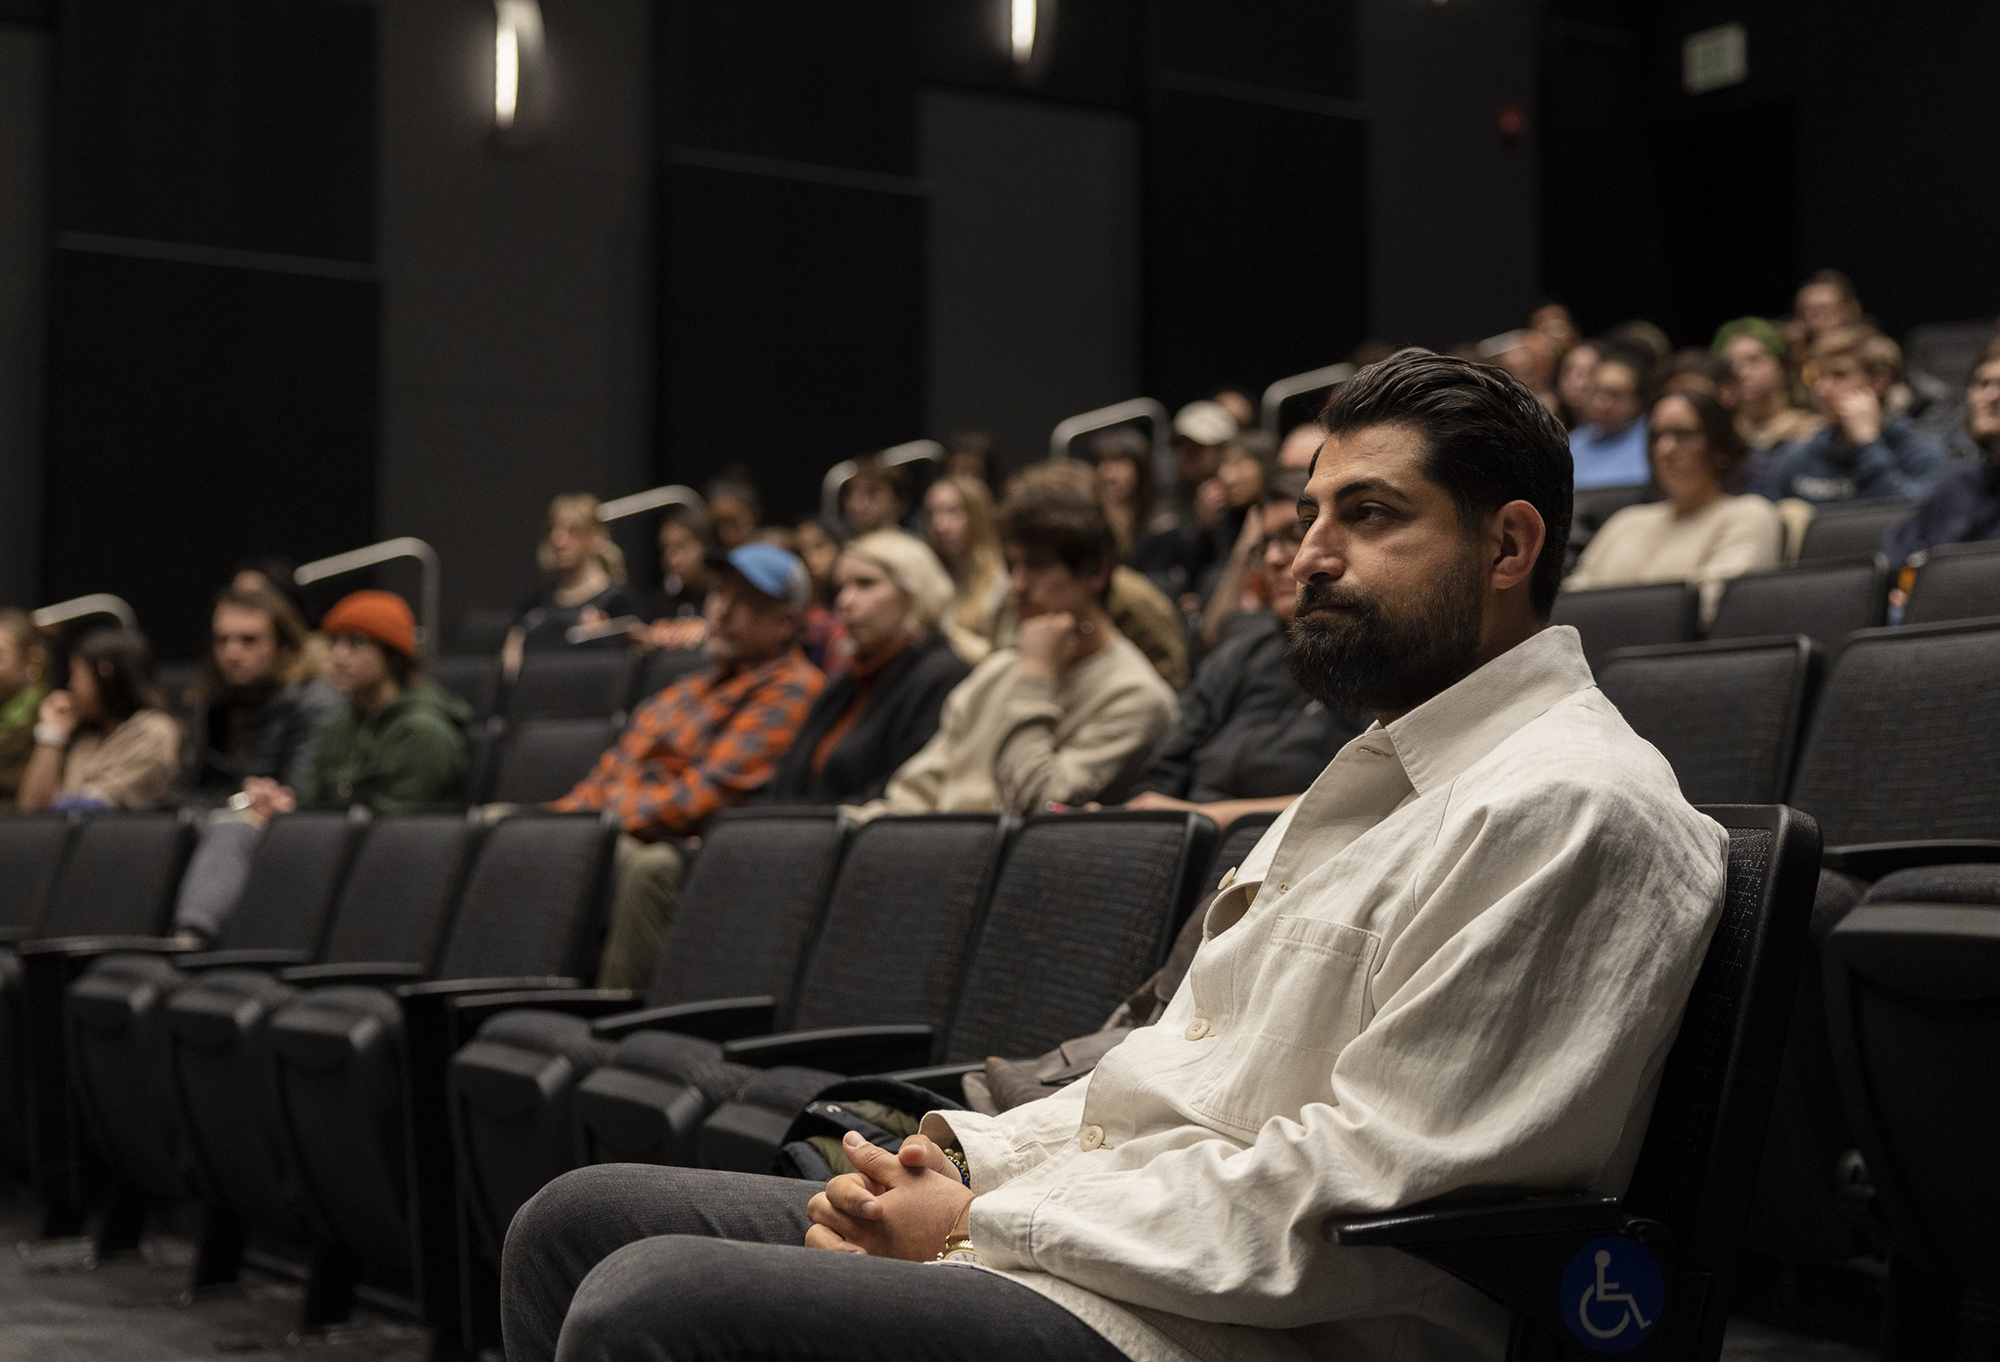 Salwan Georges sits in a theater audience waiting to speak.